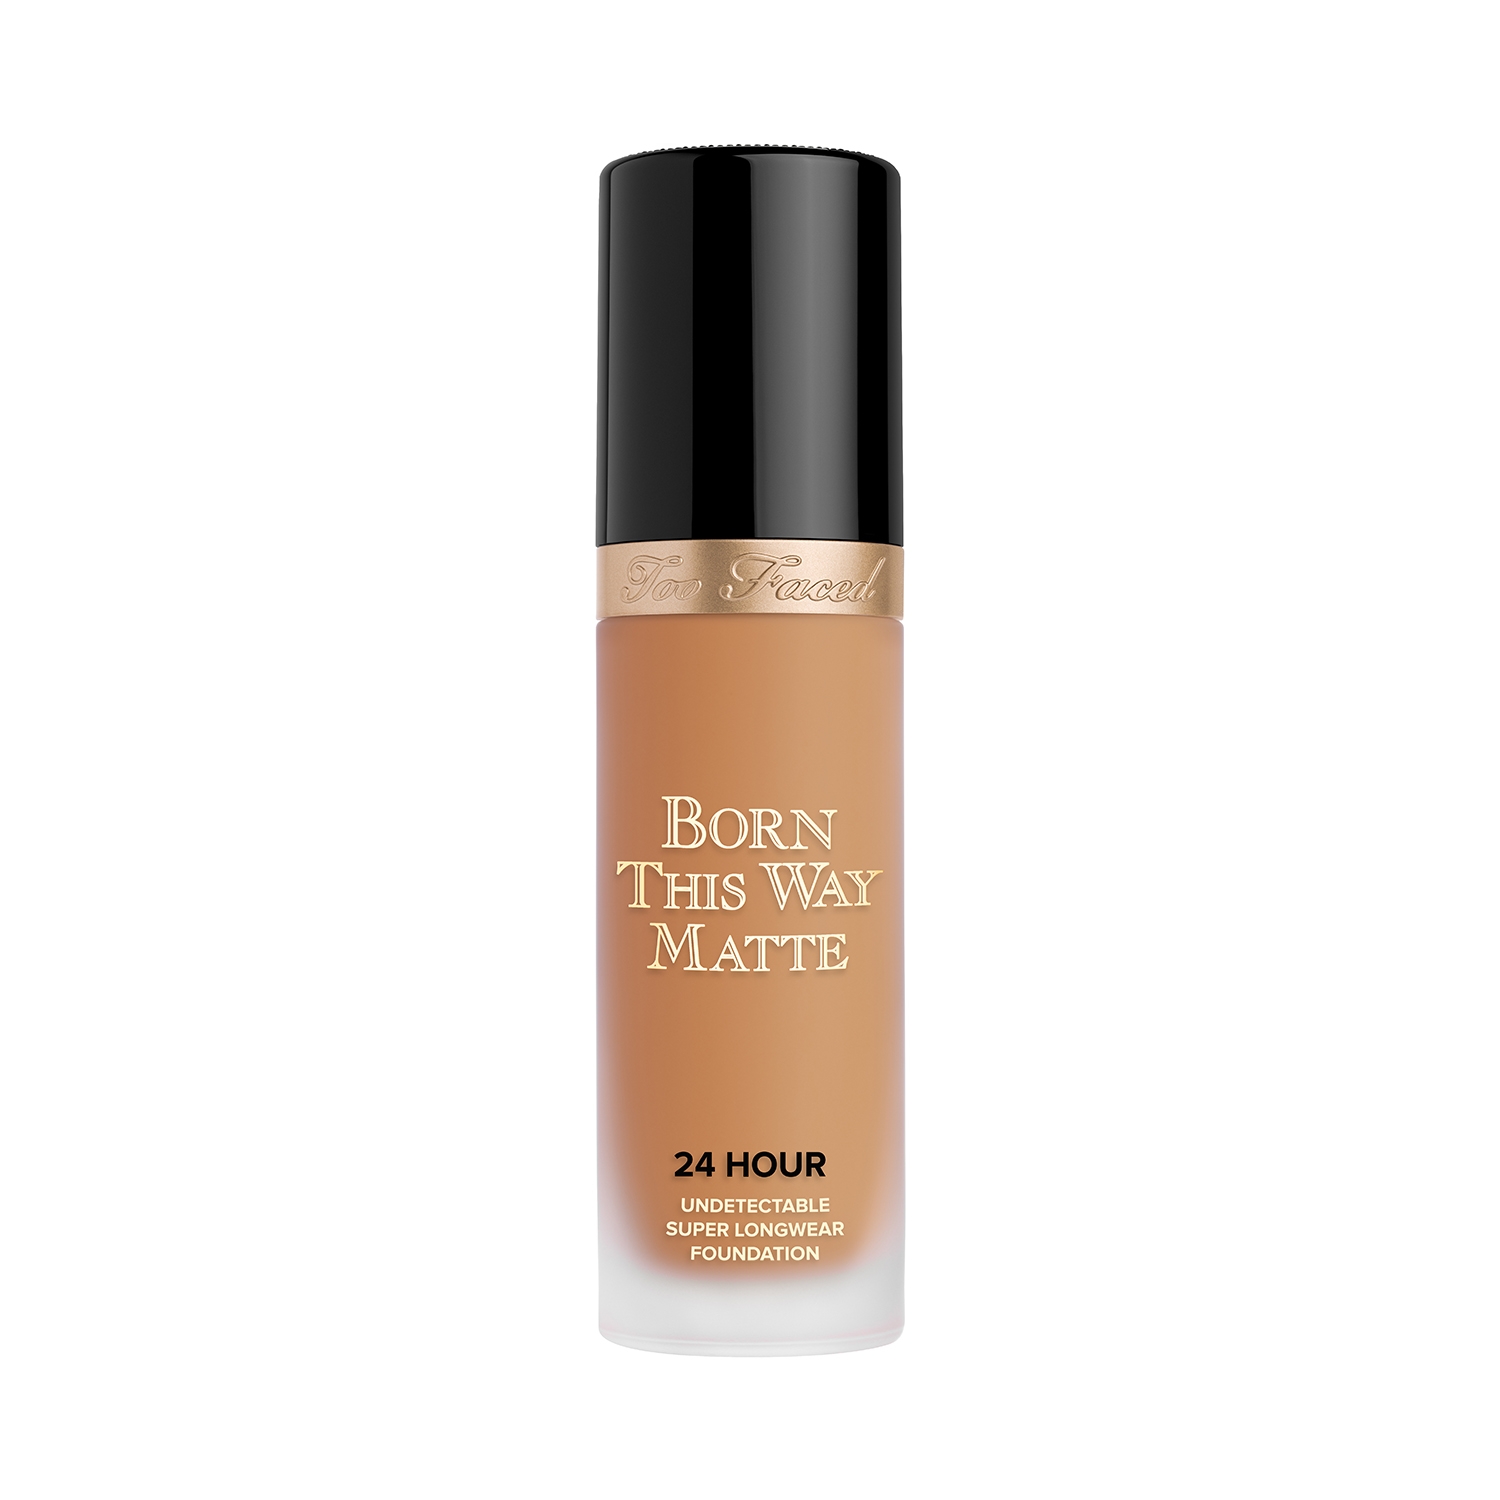 Too Faced | Too Faced Born This Way Matte Foundation - Caramel (30ml)